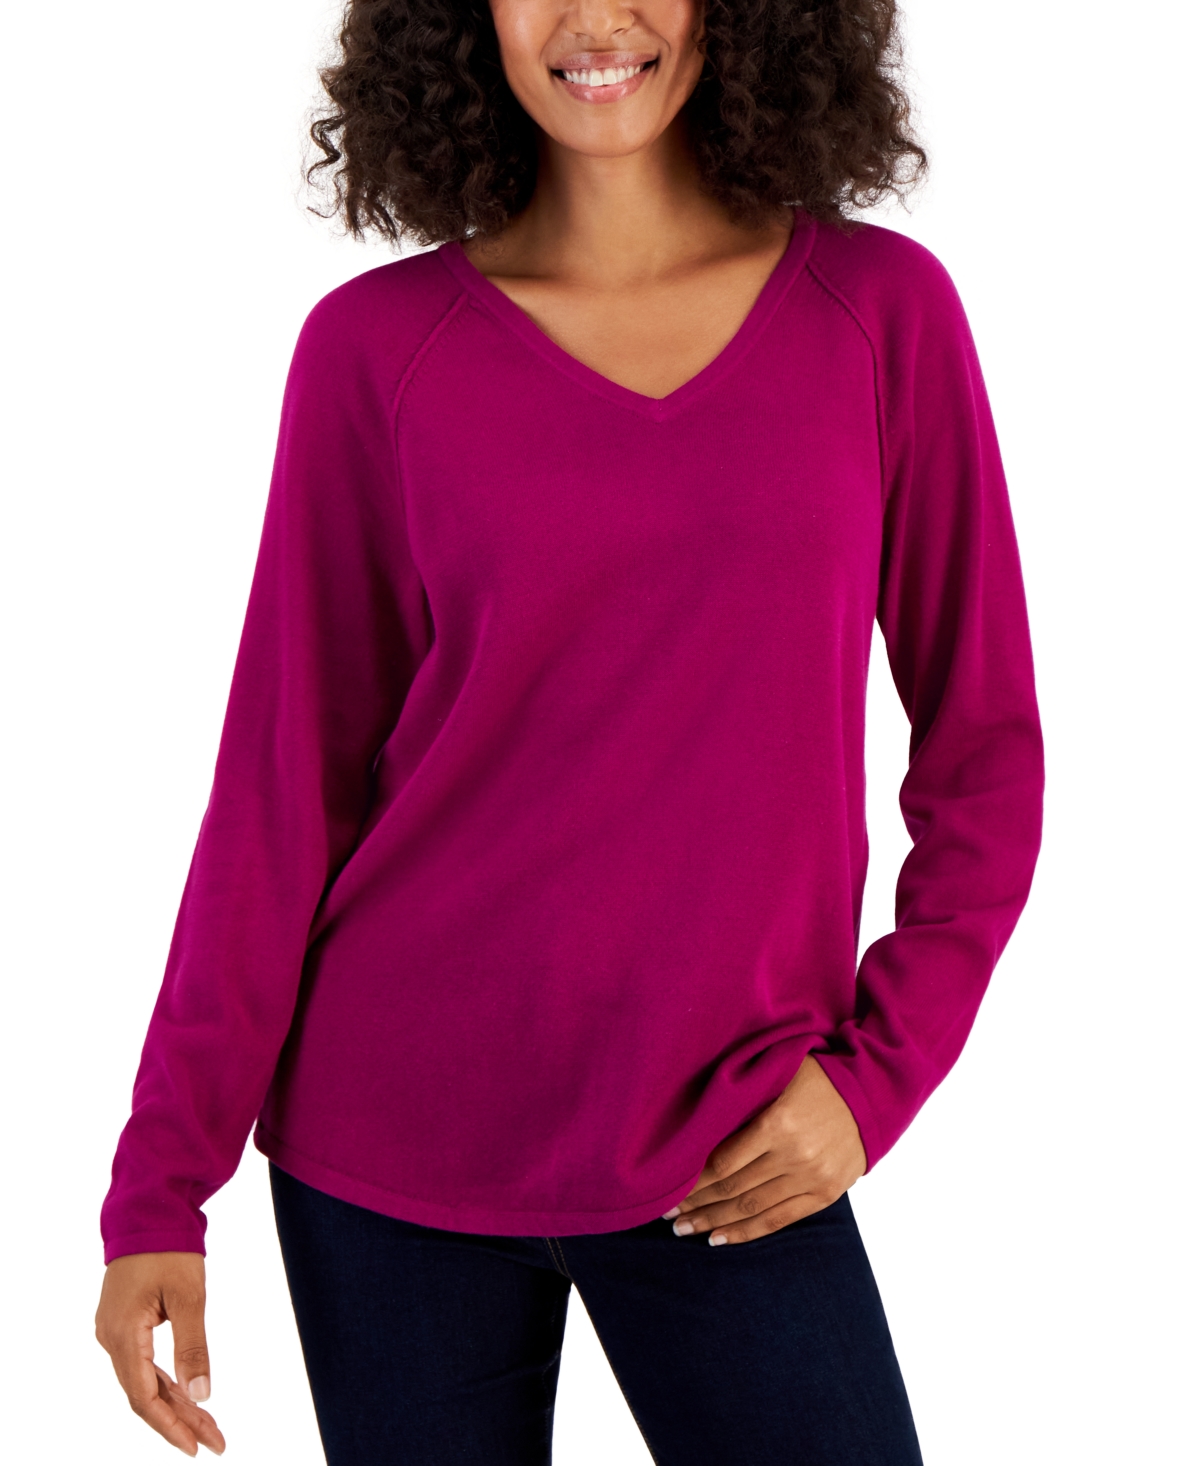 Women's Cotton V-Neck Sweater, Created for Macy's - Autumn Berry